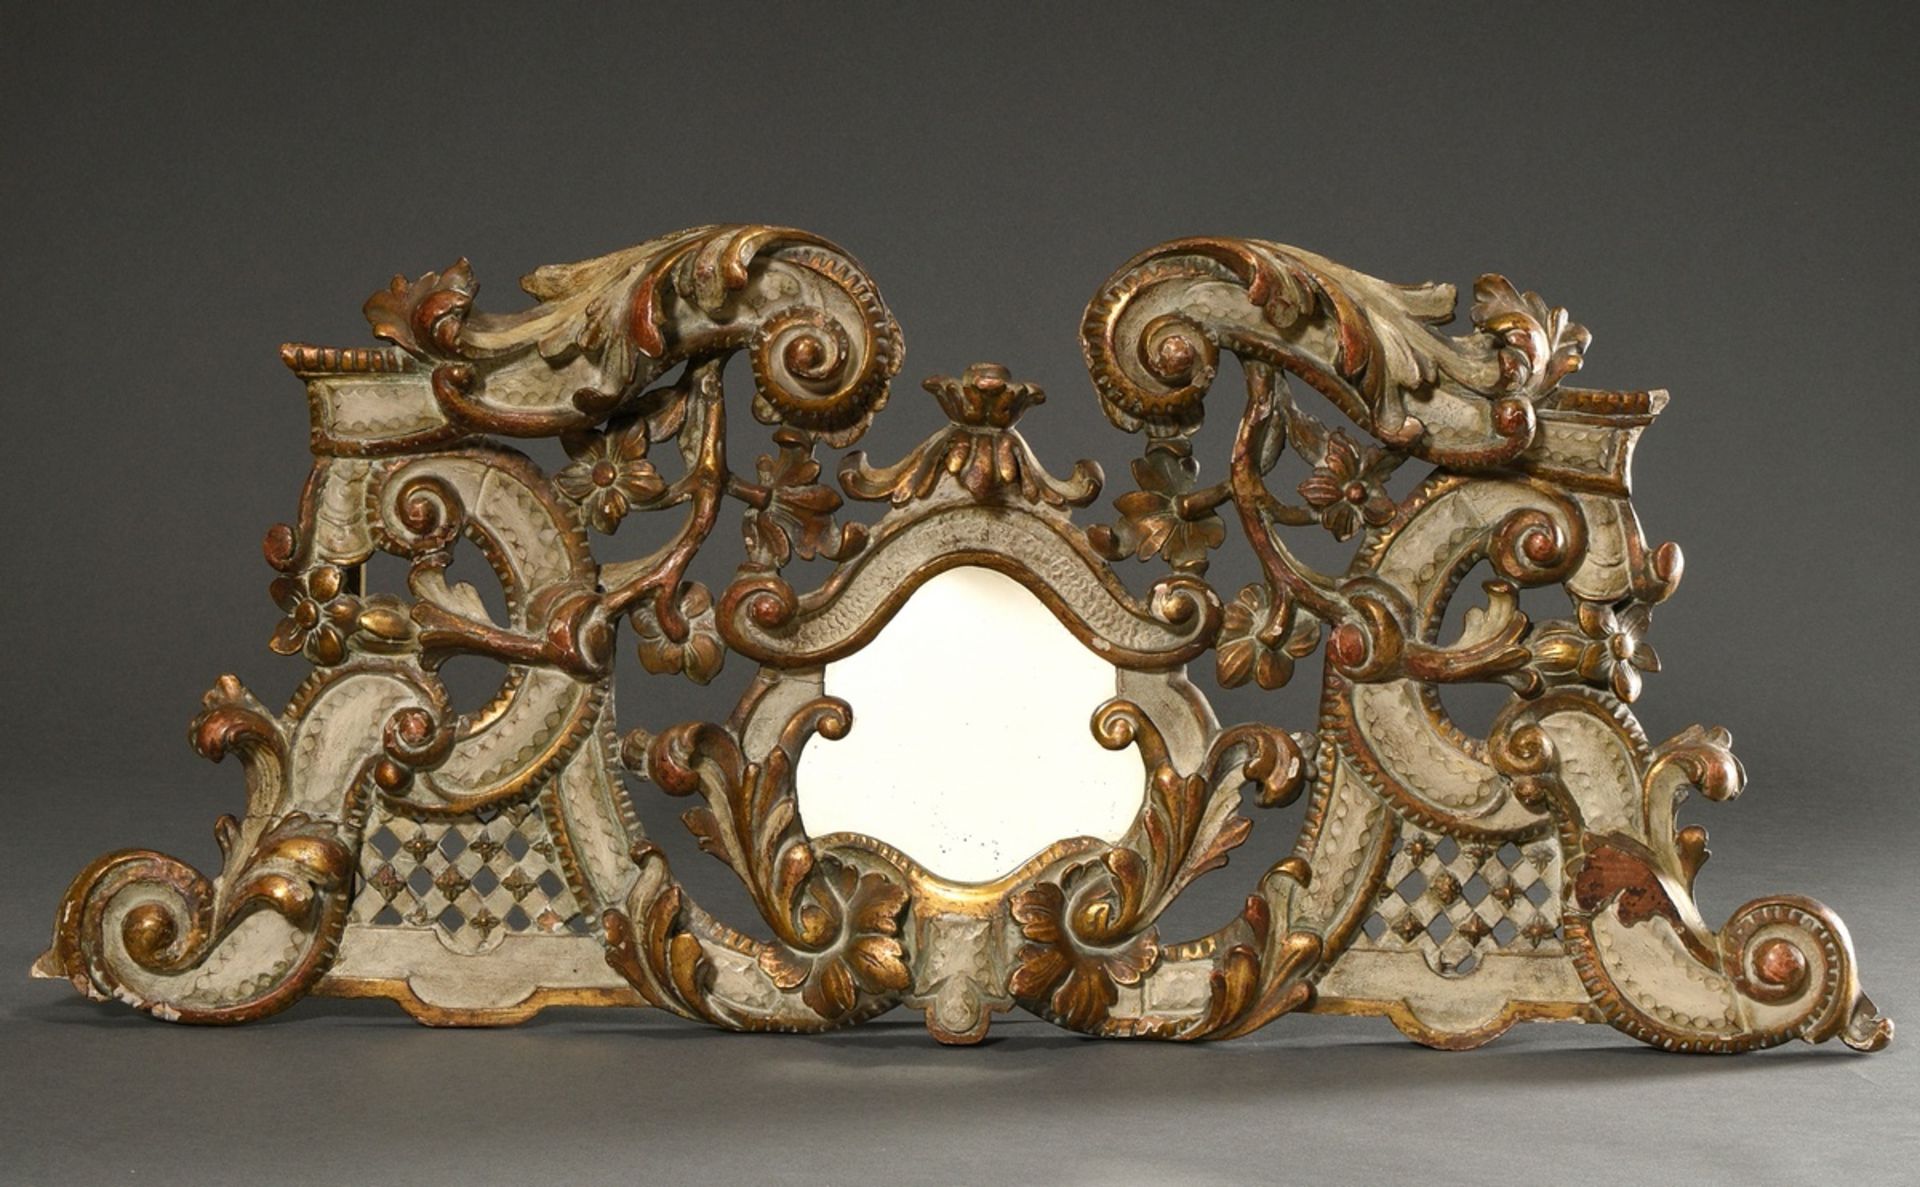 Elaborately carved and finely pierced supraport with volutes, garlands of flowers, latticework and 